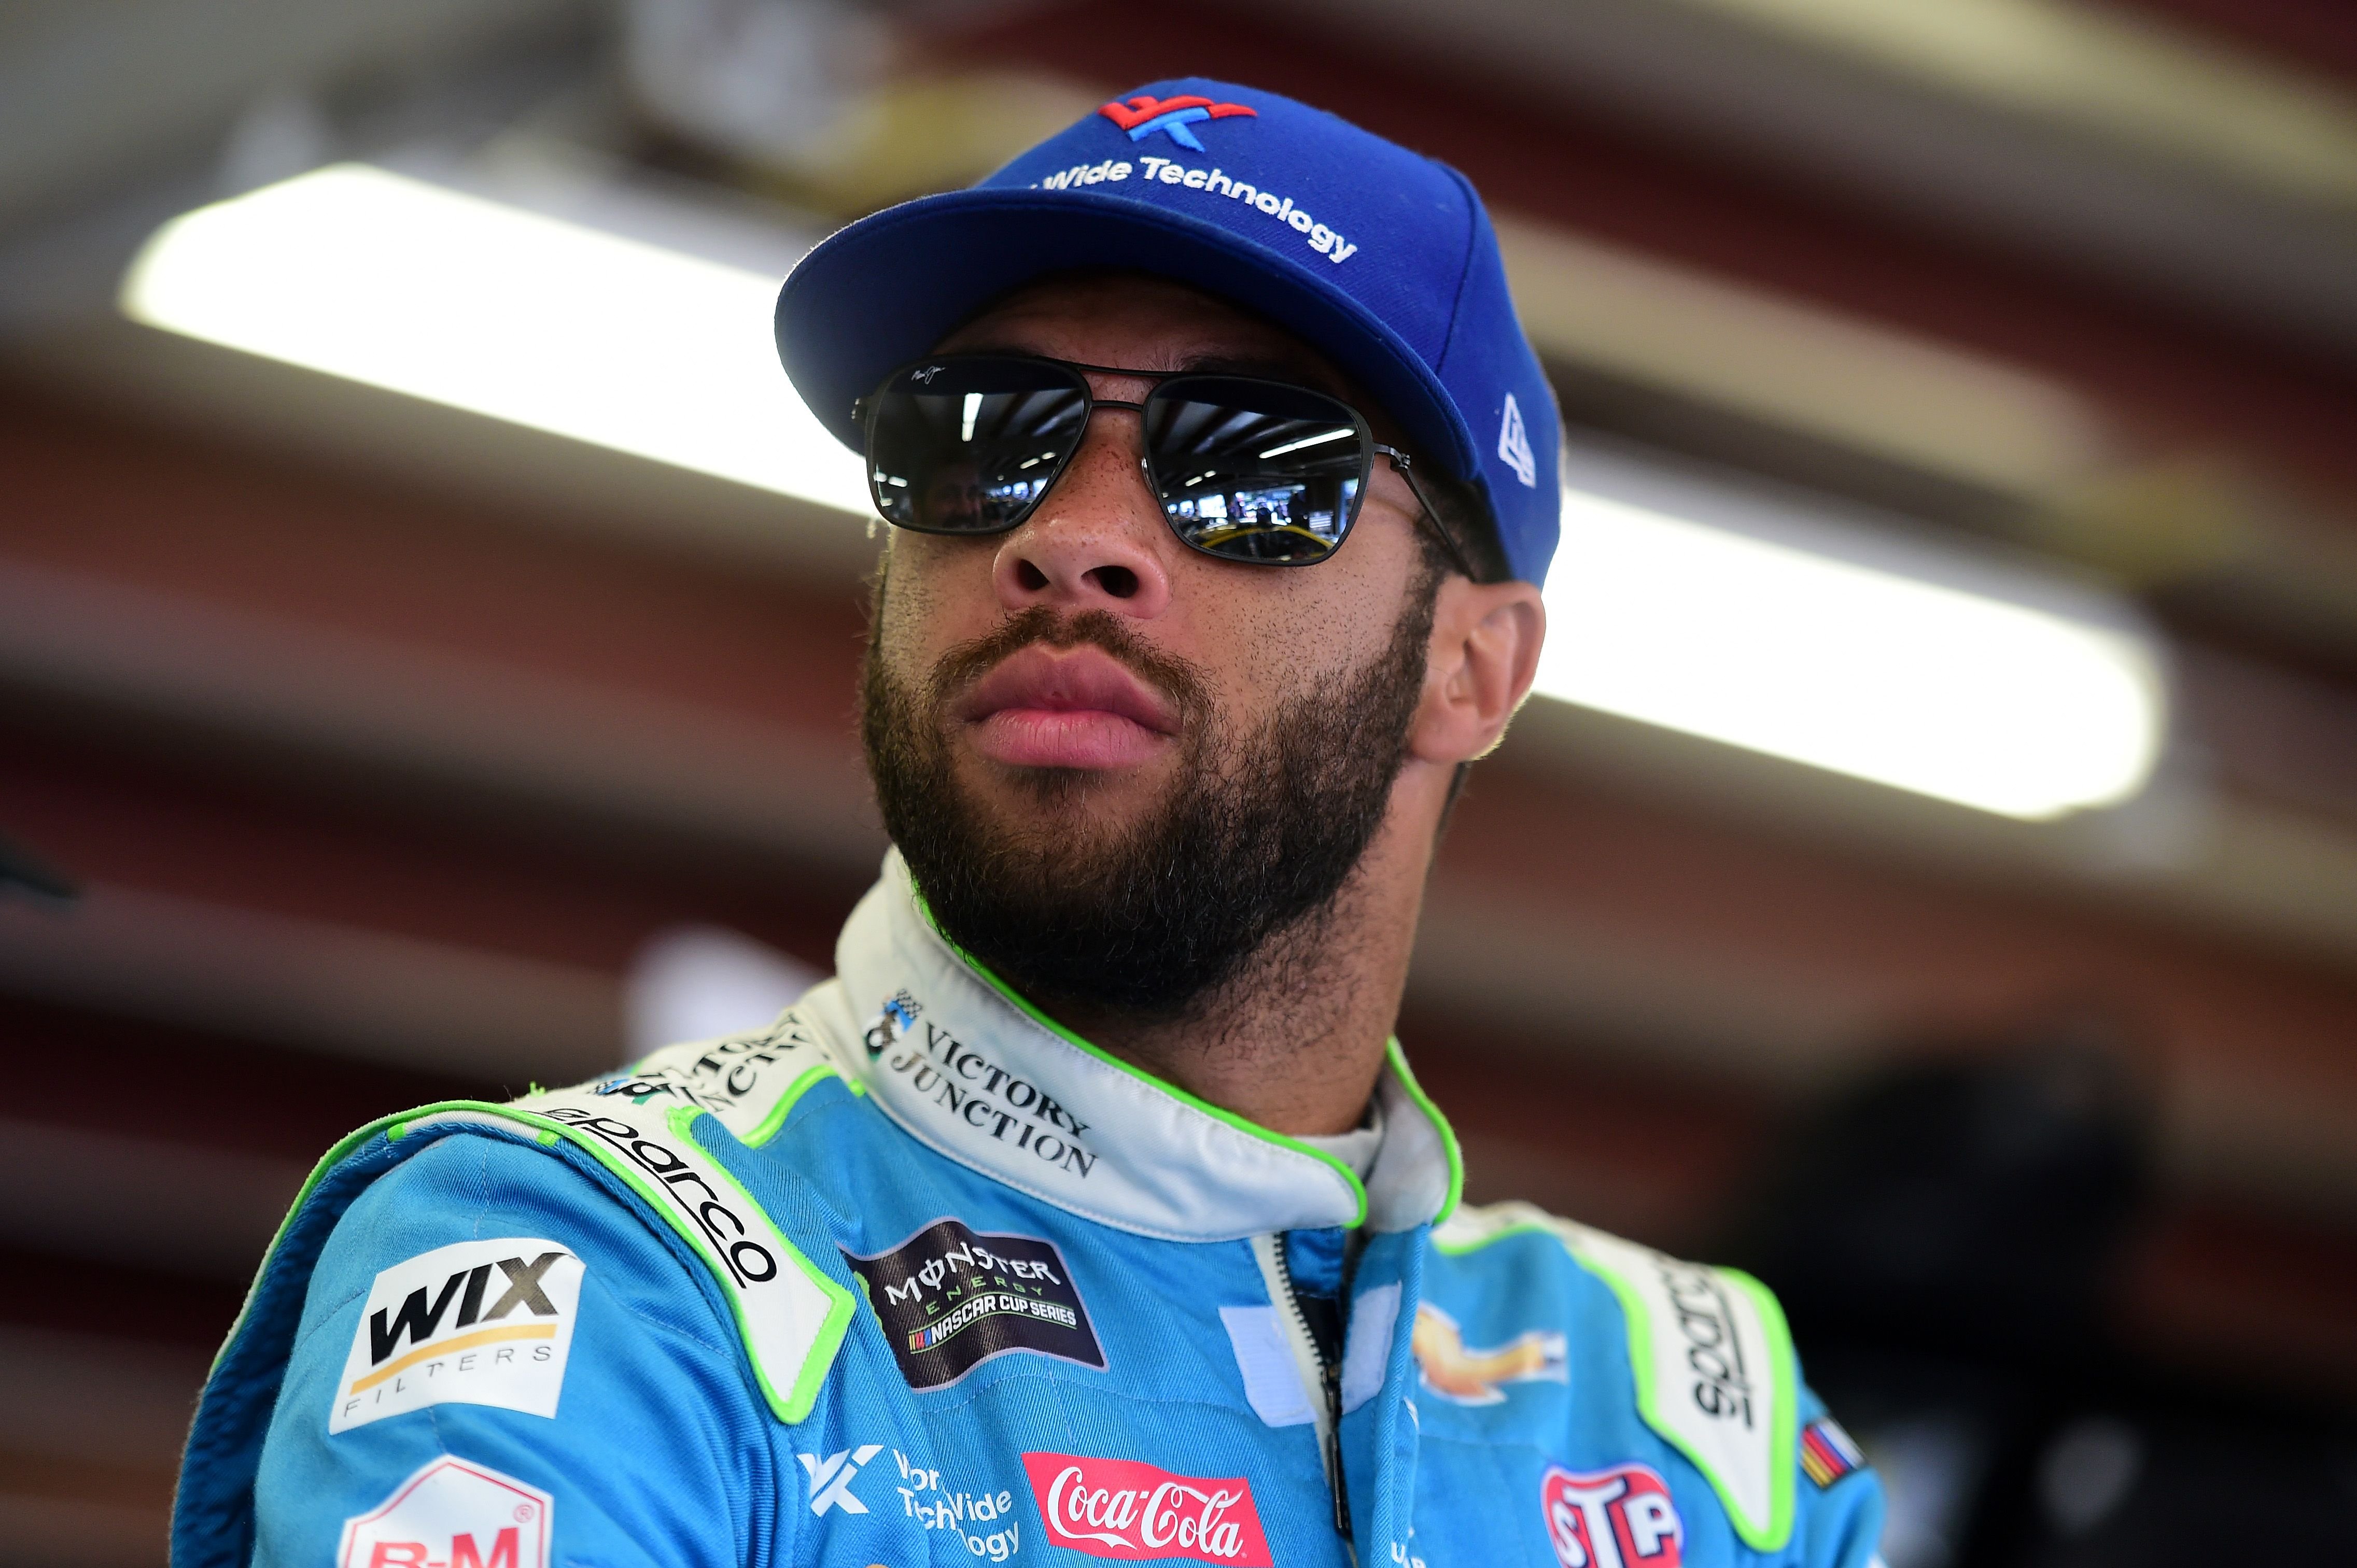 NASCAR driver Bubba Wallace during practice for the Monster Energy NASCAR Cup Series Foxwoods Resort Casino 301 at New Hampshire Motor Speedway in New Hampshire | Photo: Jared C. Tilton/Getty Images